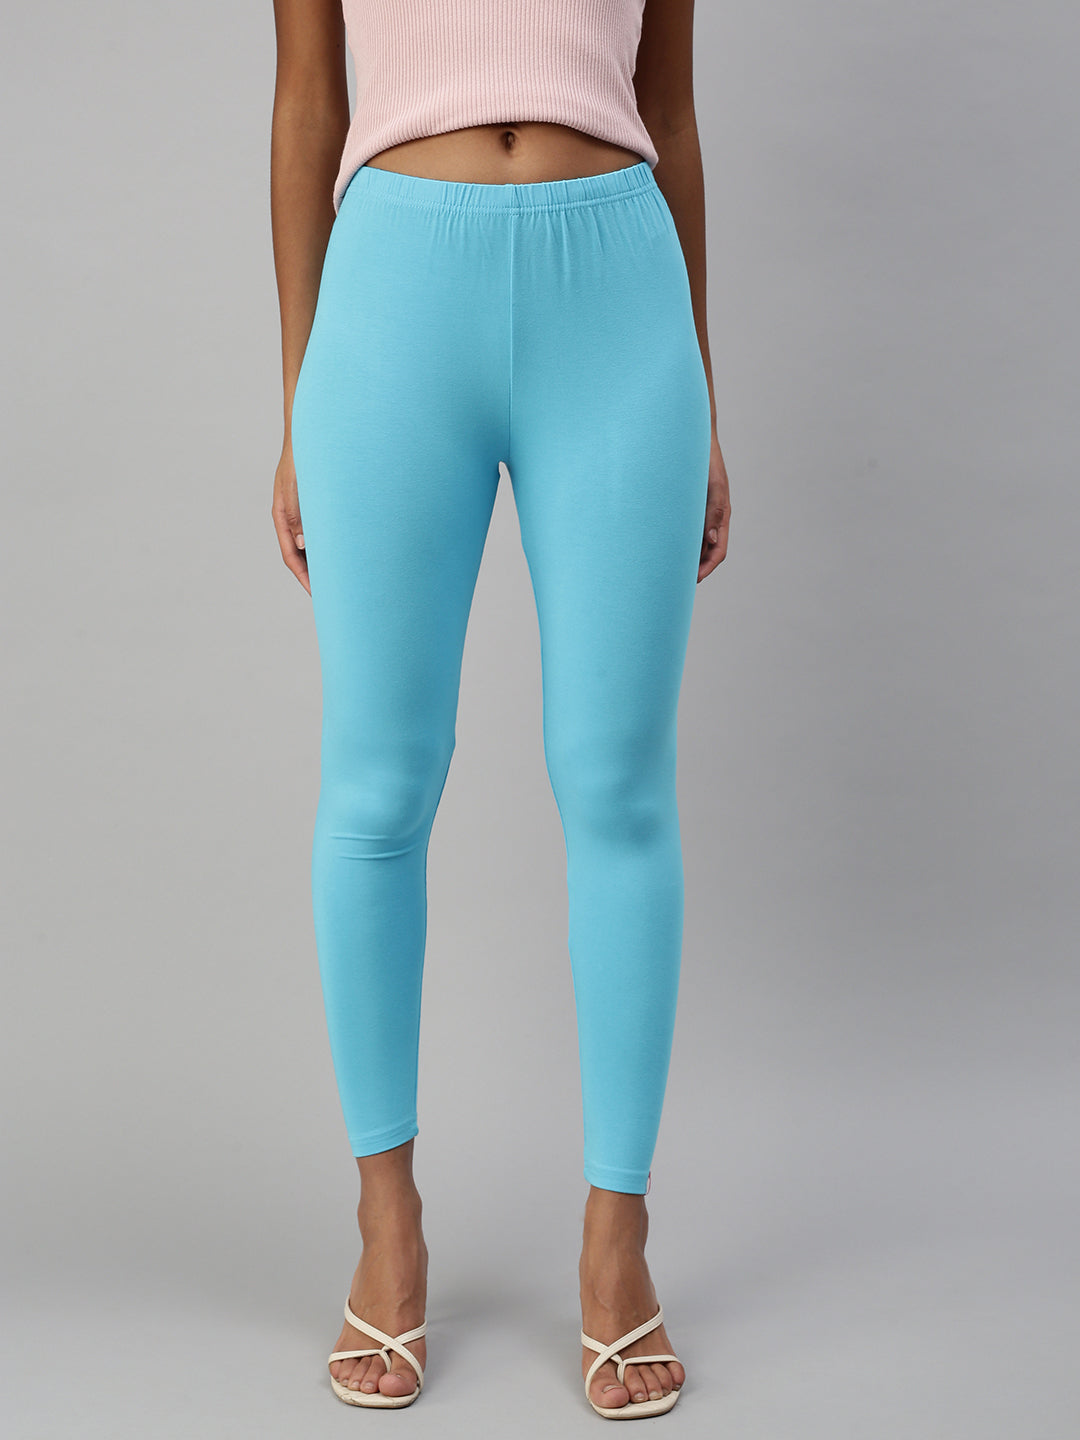 Shop the Latest Collection of Women's Ankle Jeggings at Prisma